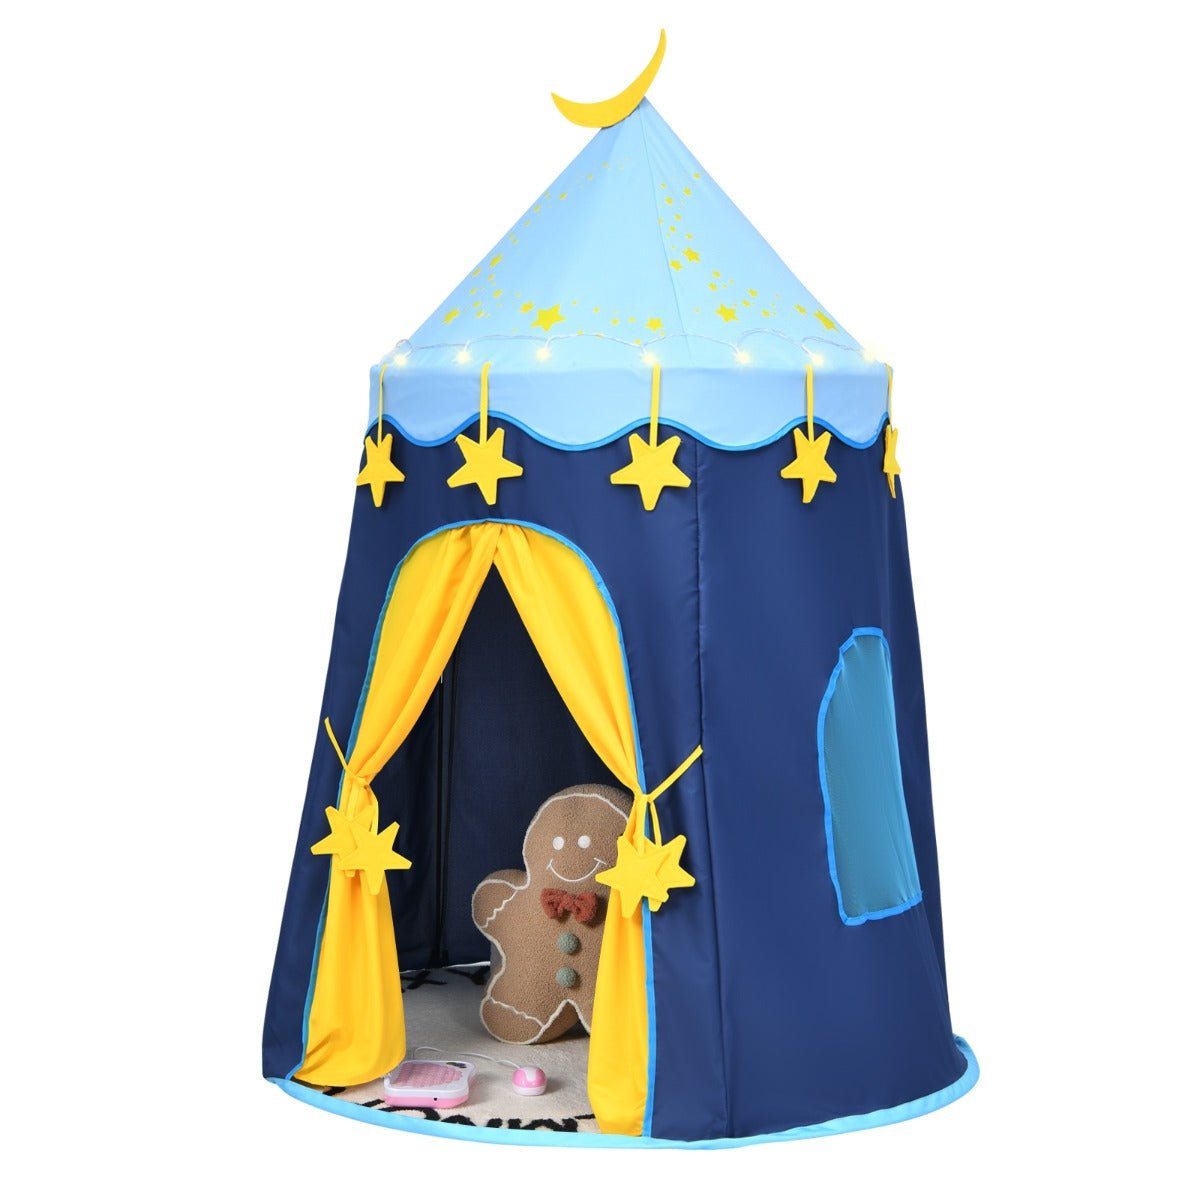 Spark Imagination: Foldable Kids Play Tent with Star Lights & Carry Bag